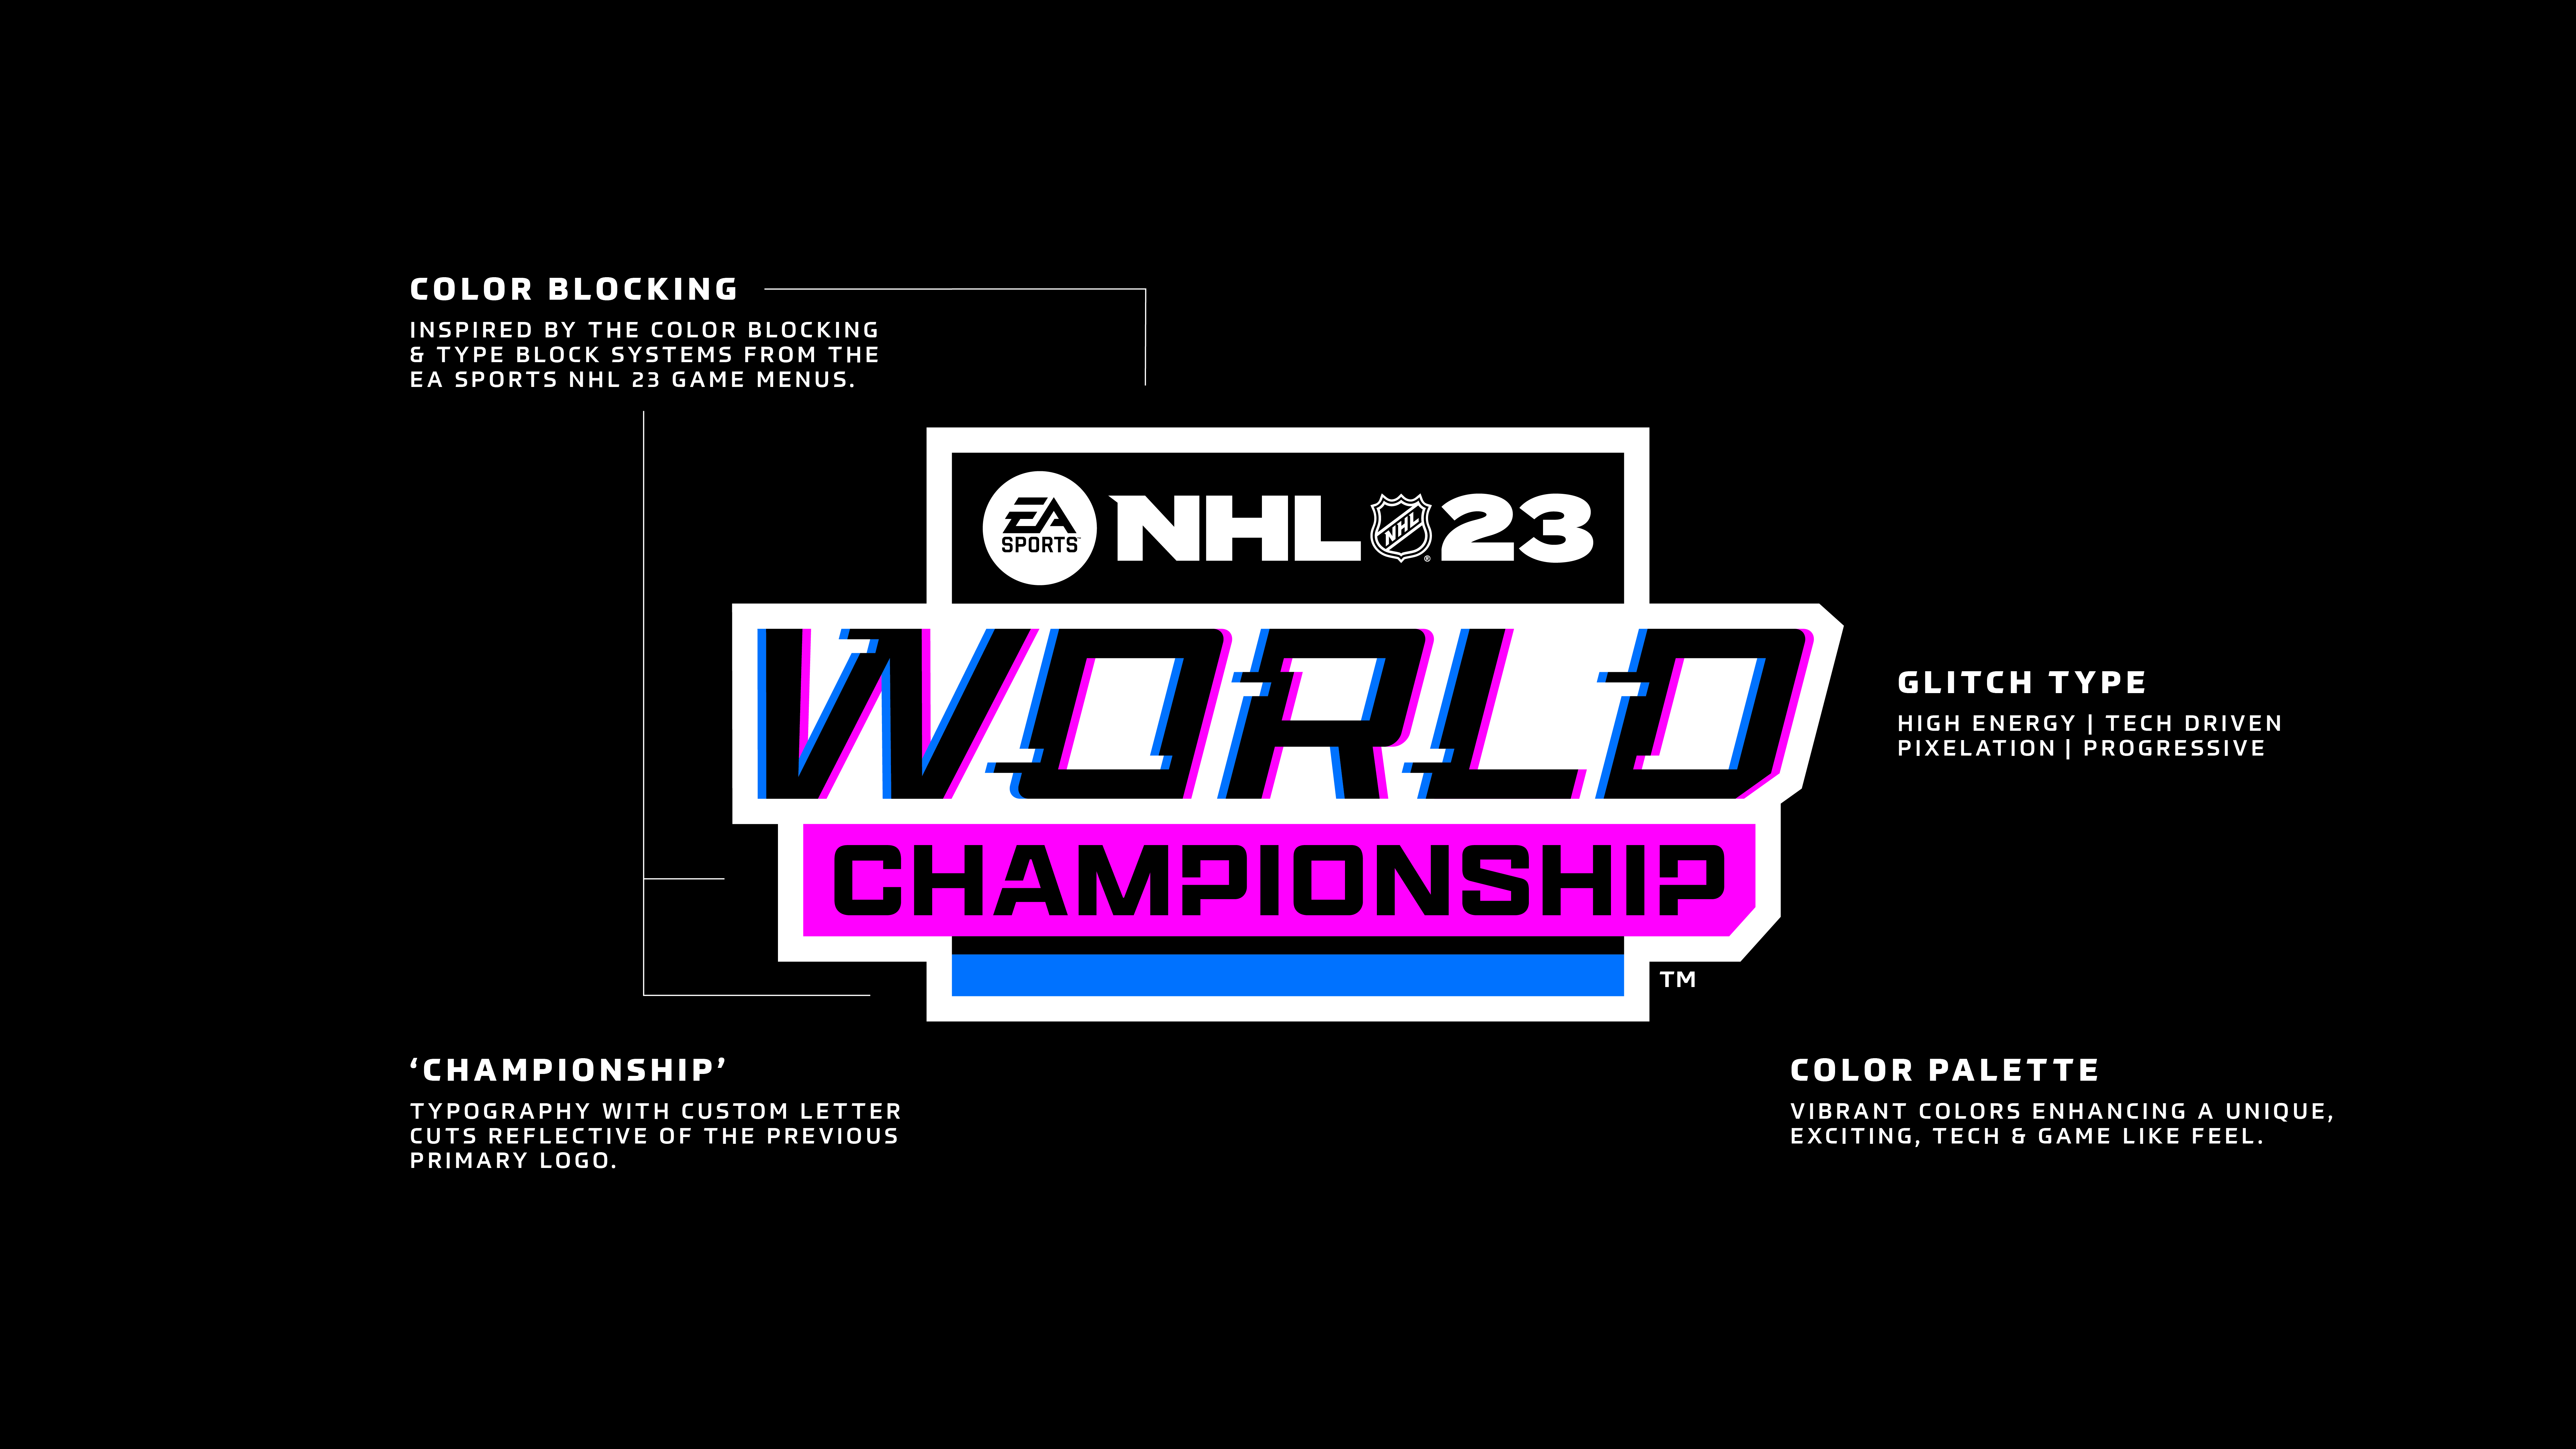 Championship Events Site Identity Announces Esports Annual New Brand of for Media News Expanded - NHL.com NHL - and Calendar